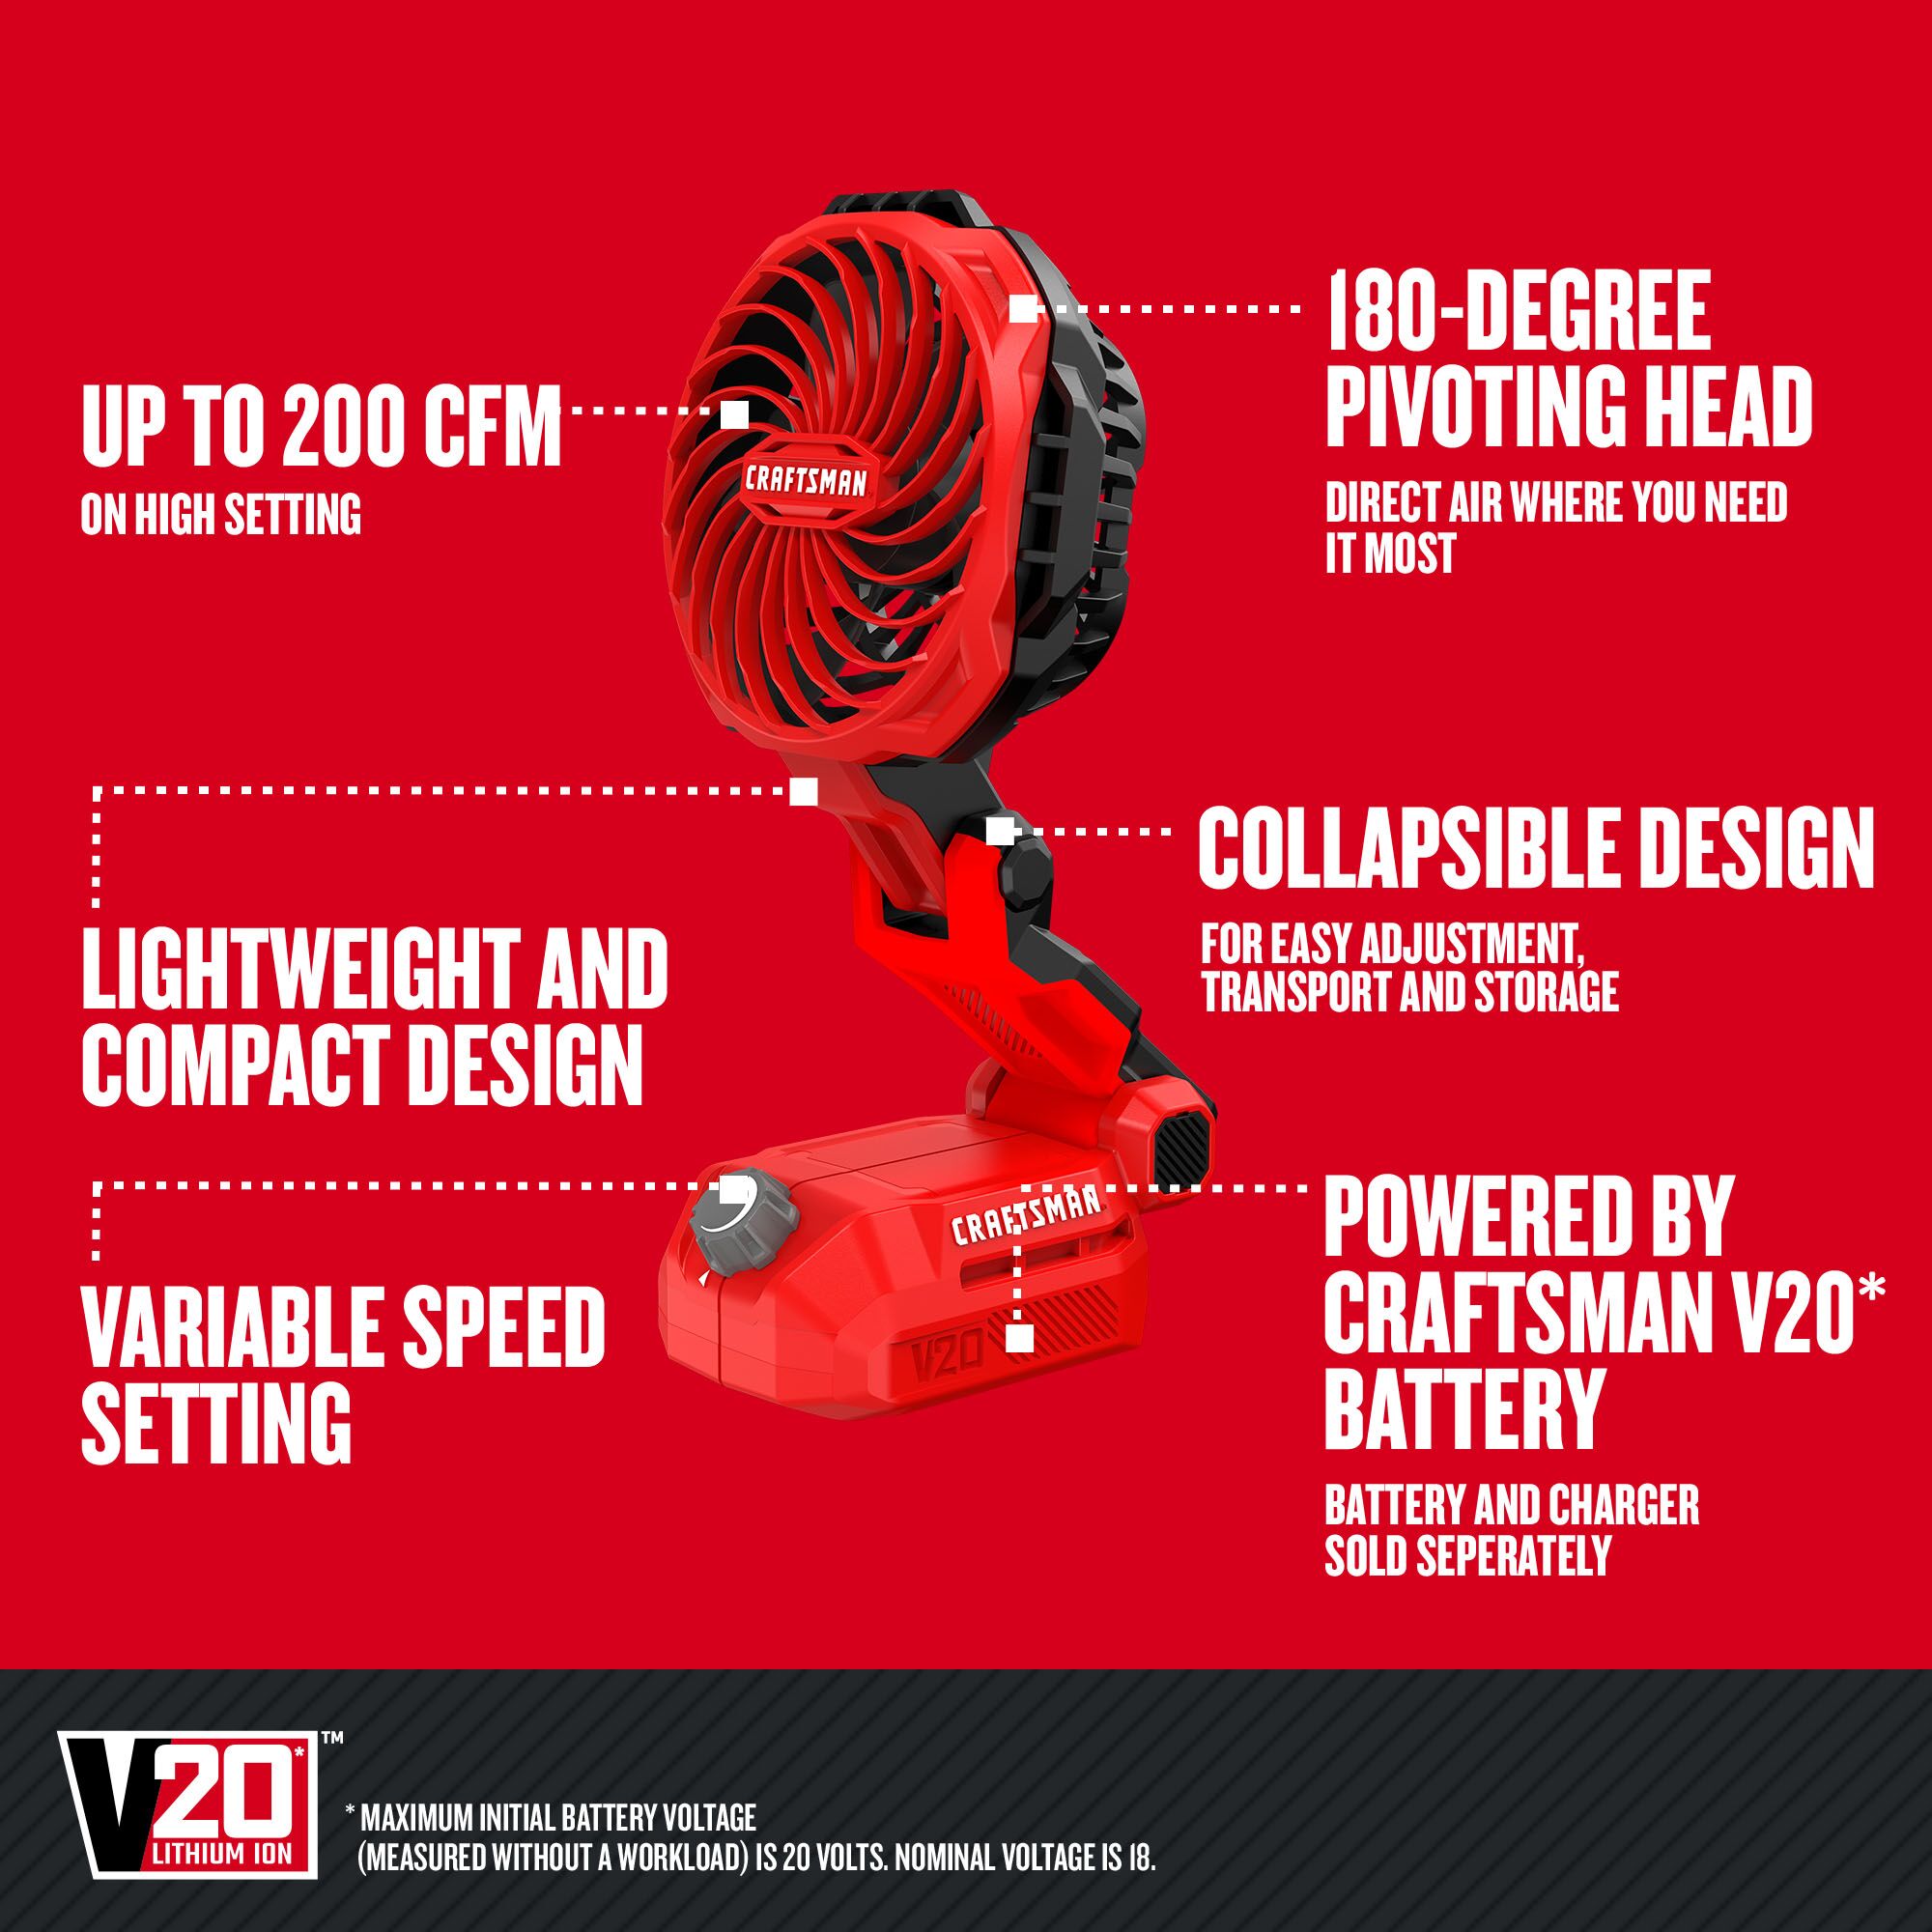 Walk-around graphic of product highlighting up to 200 CFM, 180-degree pivoting head, lightweight and compact design, collapsible, variable speed setting, powered by CRAFTSMAN V20 system